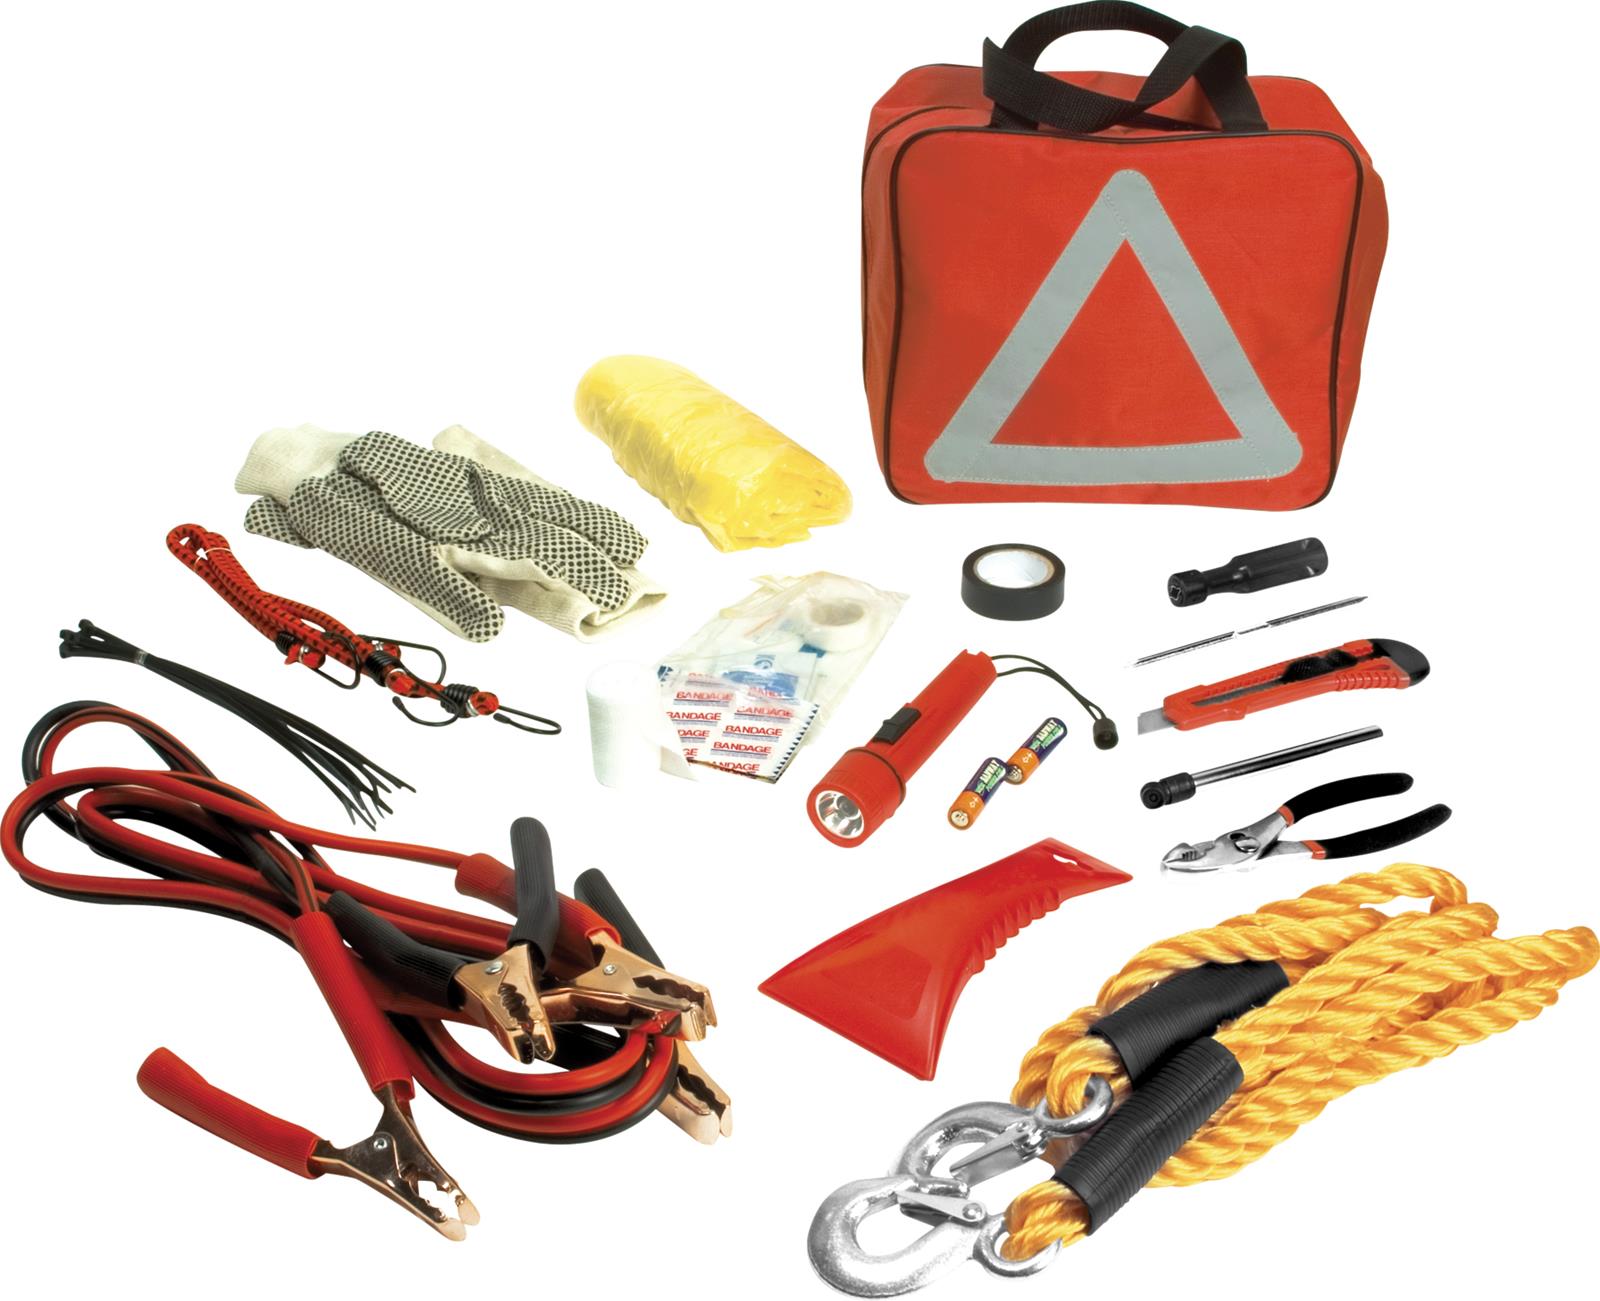  Roadside Emergency Car Kit with Jumper Cables - Car